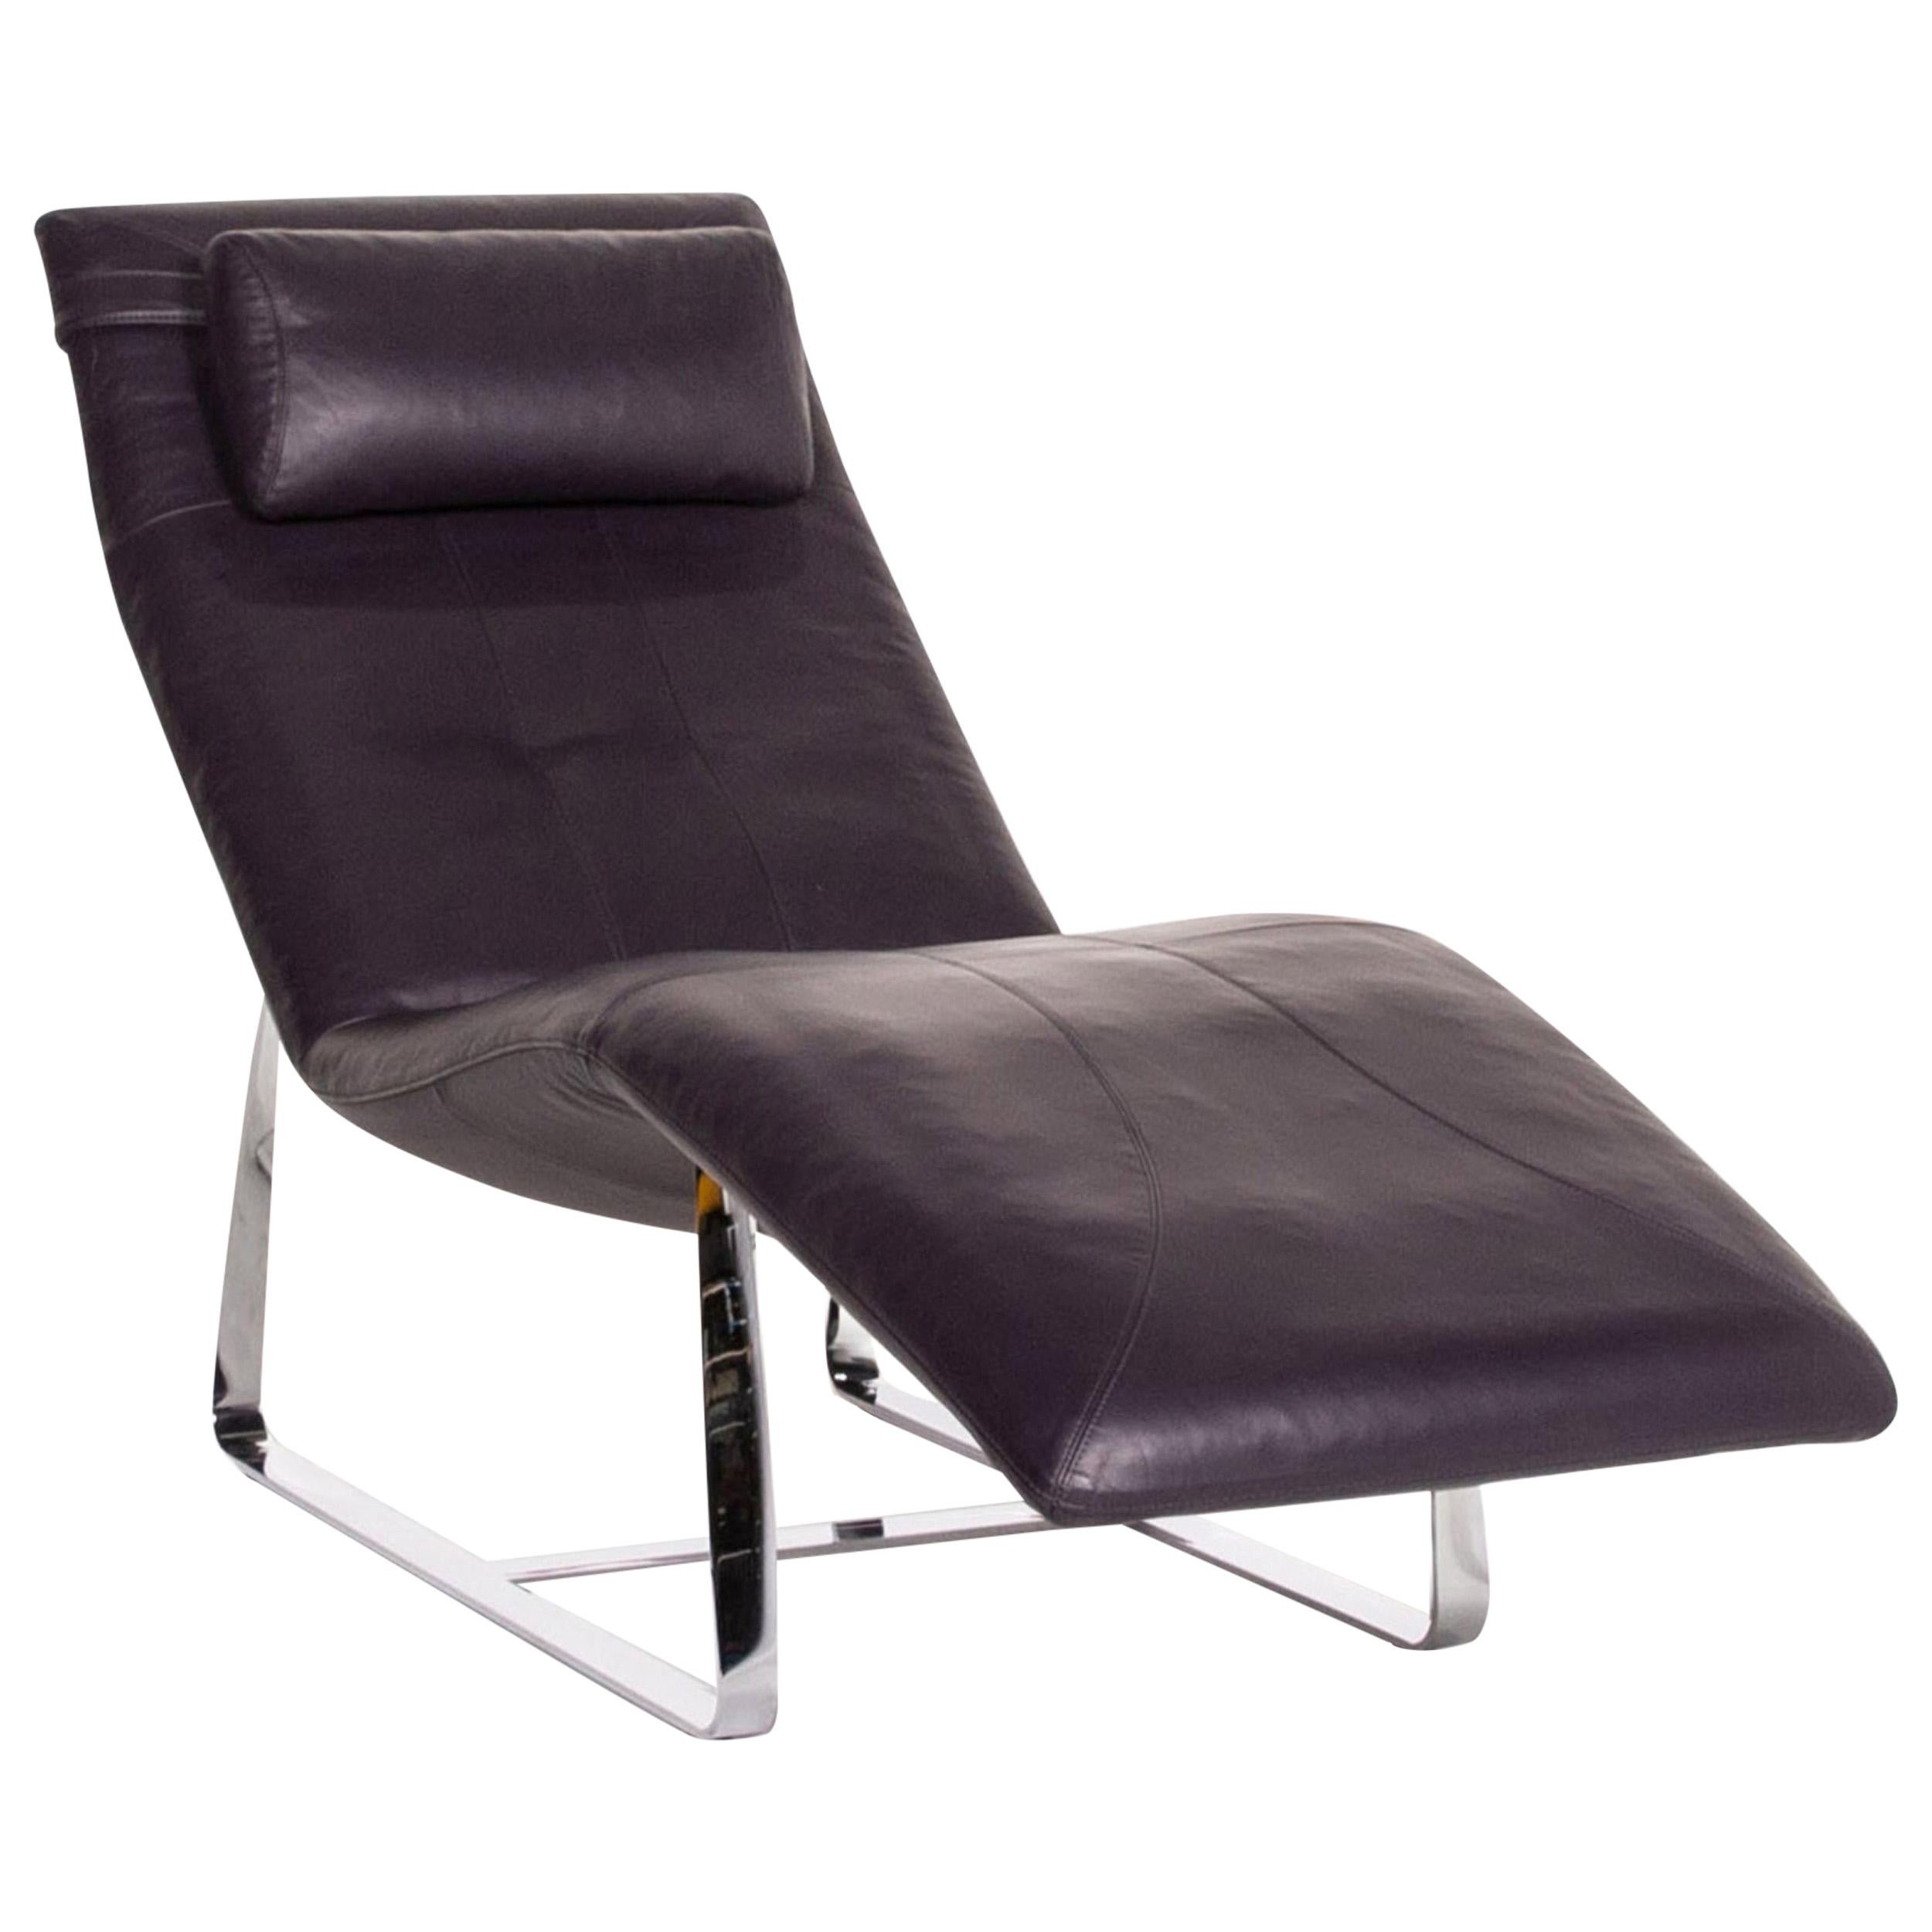 Rolf Benz Leather Lounger Violet Relax Lounger